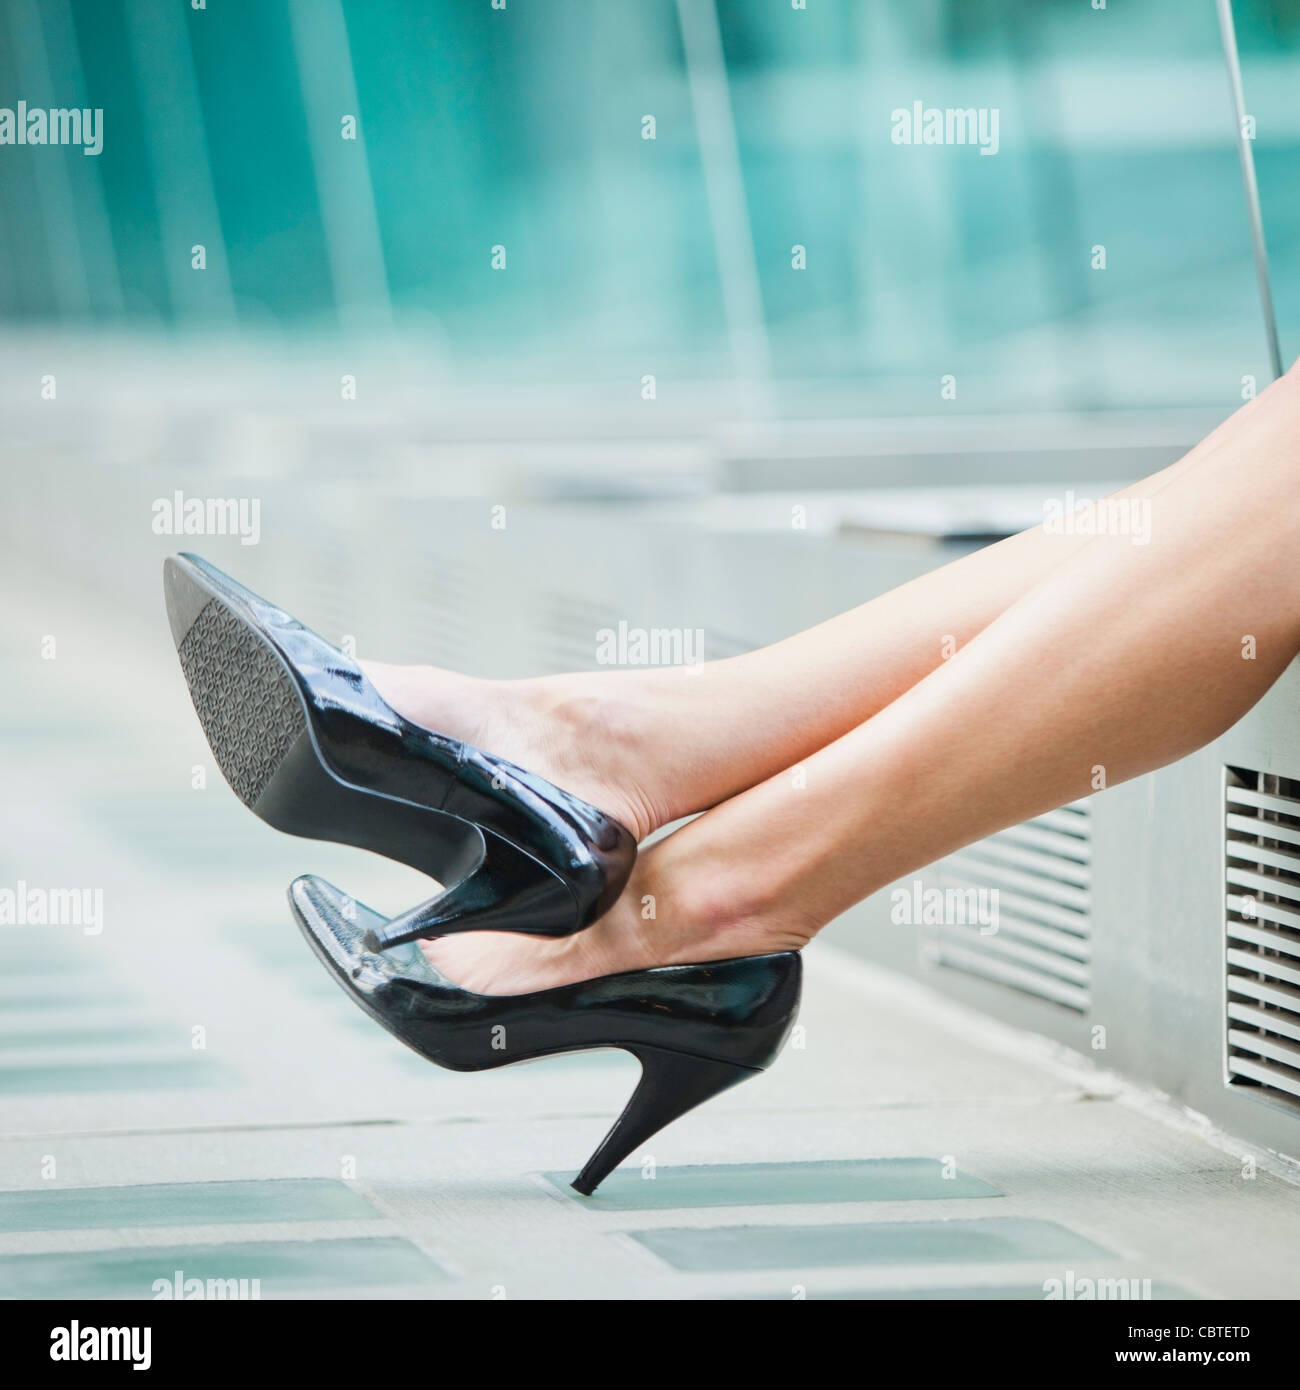 Wearing High Heeled Shoes High Resolution Stock Photography and Images -  Alamy